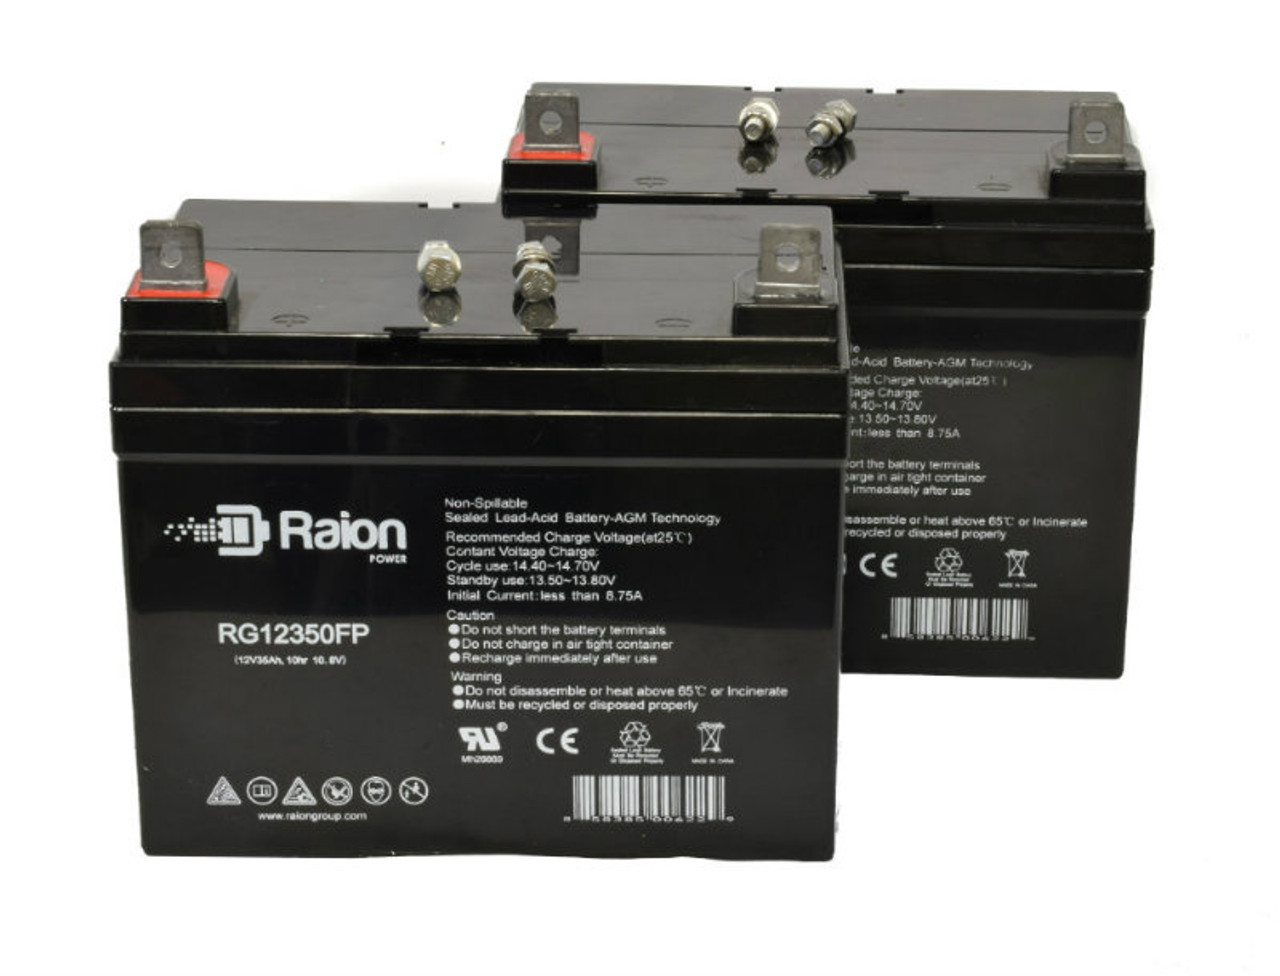 Raion Power Replacement 12V 35Ah Lawn Mower Battery for Gilson GT14E - 2 Pack